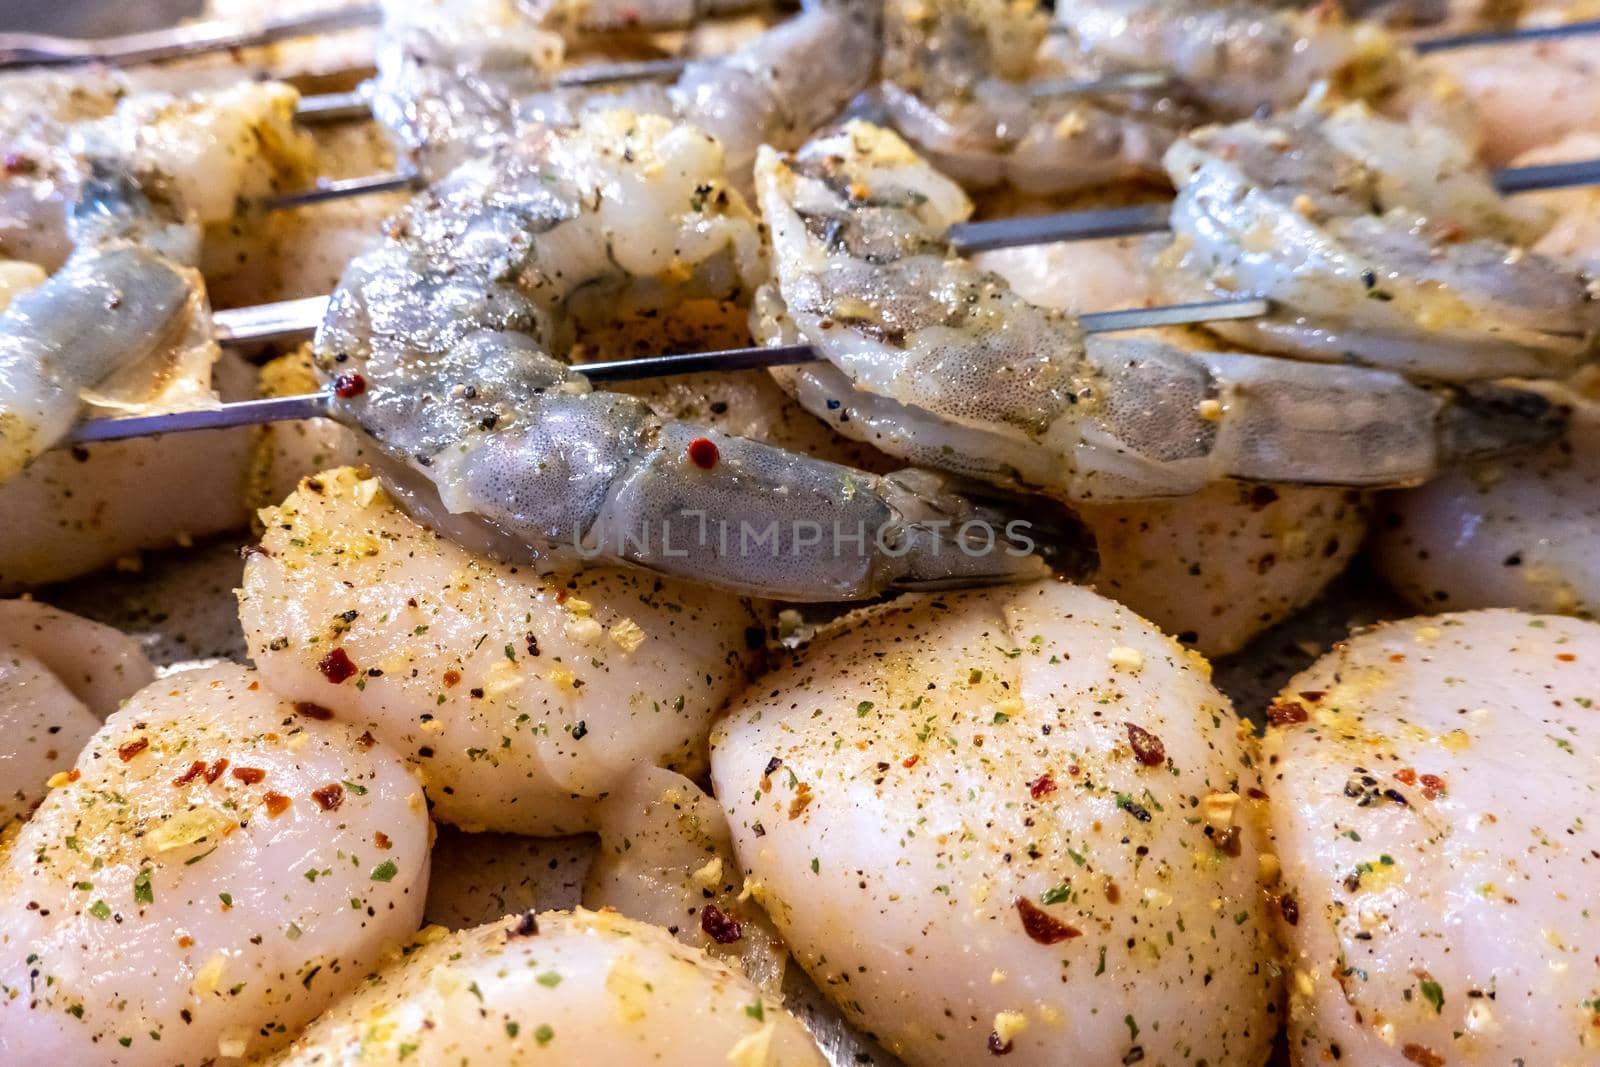 raw scallops and shrimp prepared for party by digidreamgrafix